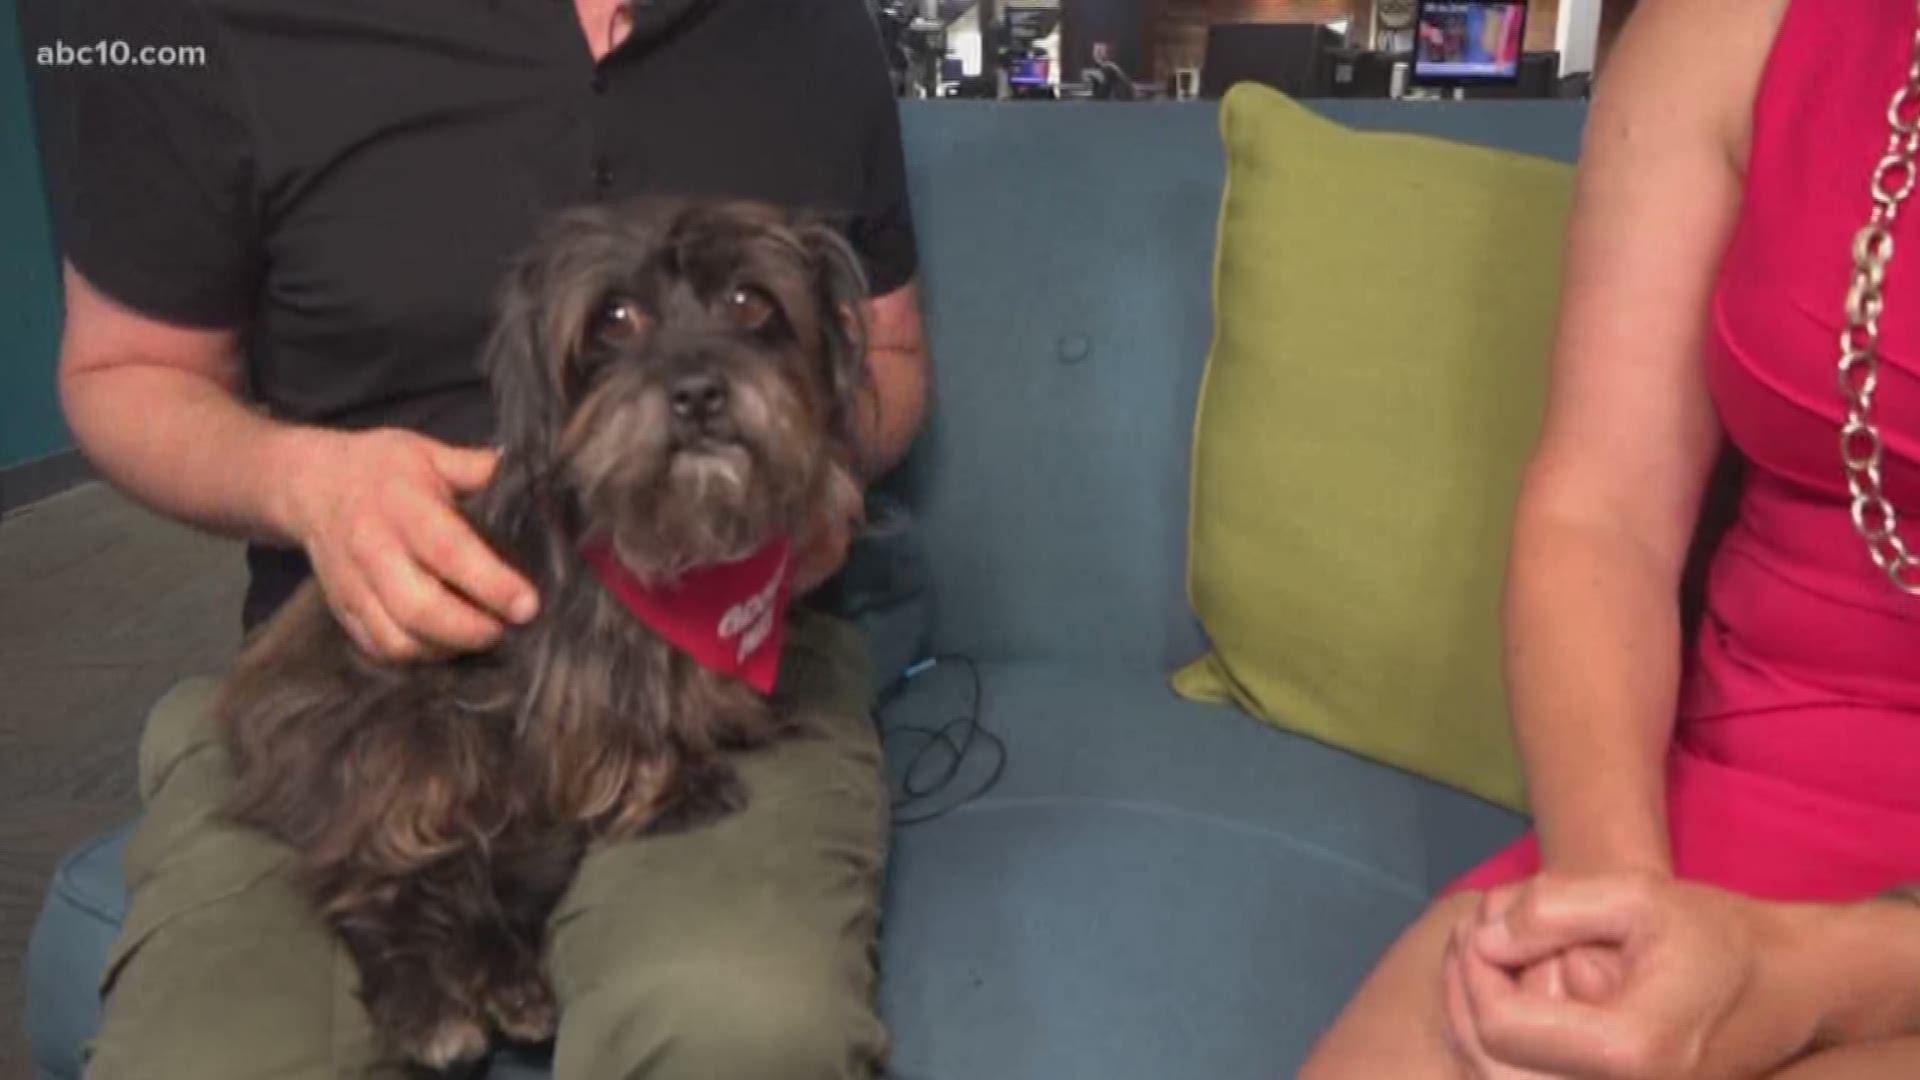 The Sacramento SPCA joined ABC10 this morning trying to find a home for Luca who's a 7-ear-old Terrier mix. (June 16, 2018)